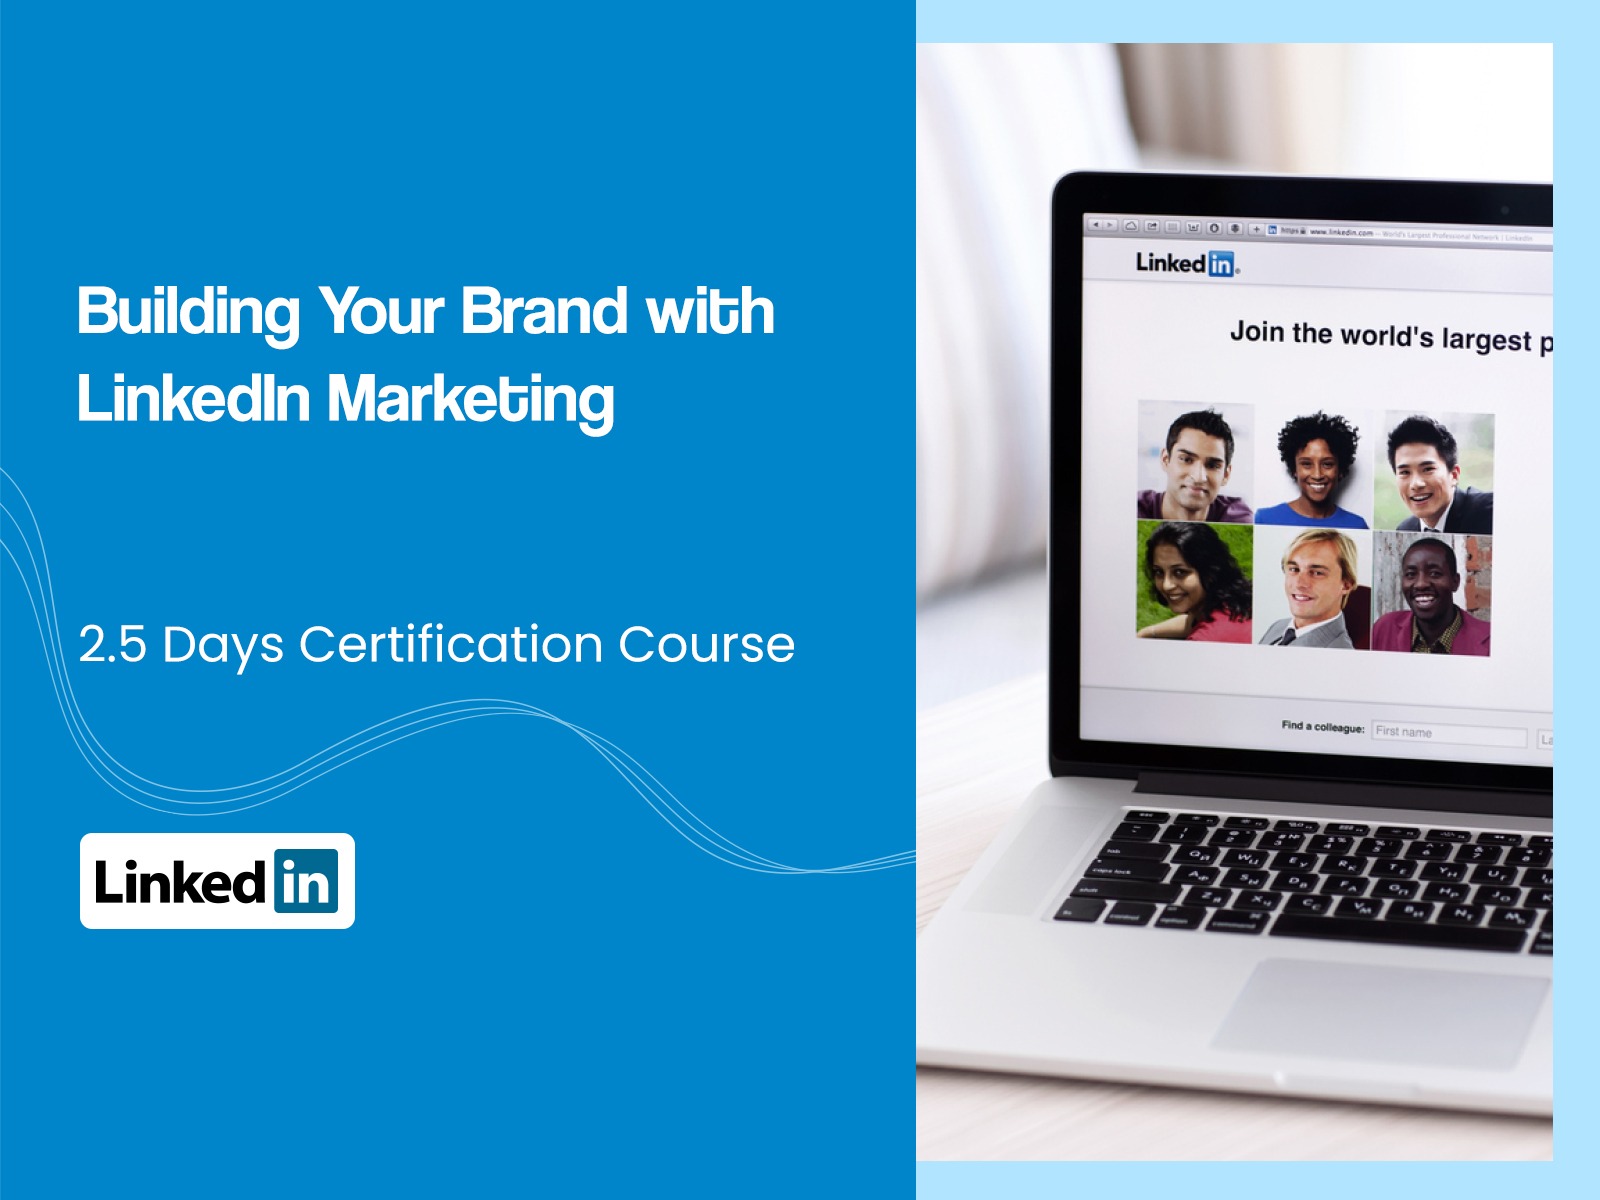 Building Your Brand with LinkedIn Marketing course in Singapore